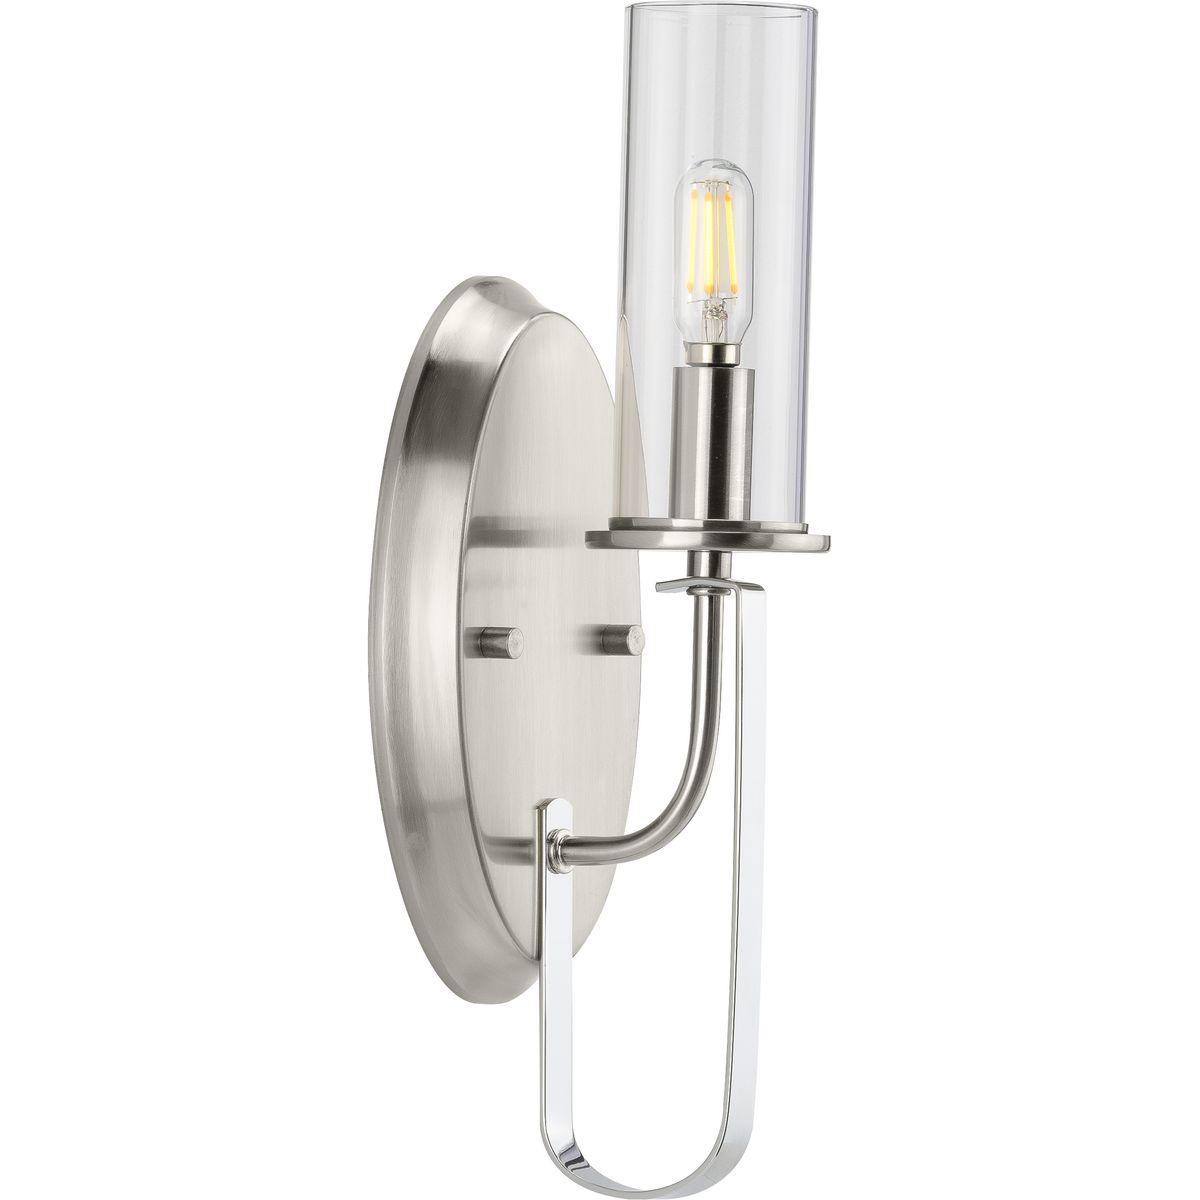 Hubbell P710082-009 Incorporate a sleek simplicity and natural beauty with the Riley Collection's One-Light Brushed Nickel Wall Bracket. A clear glass shade offers stunning illumination. The shade rests on a gorgeous dual-toned frame with a brushed nickel finish and touches 